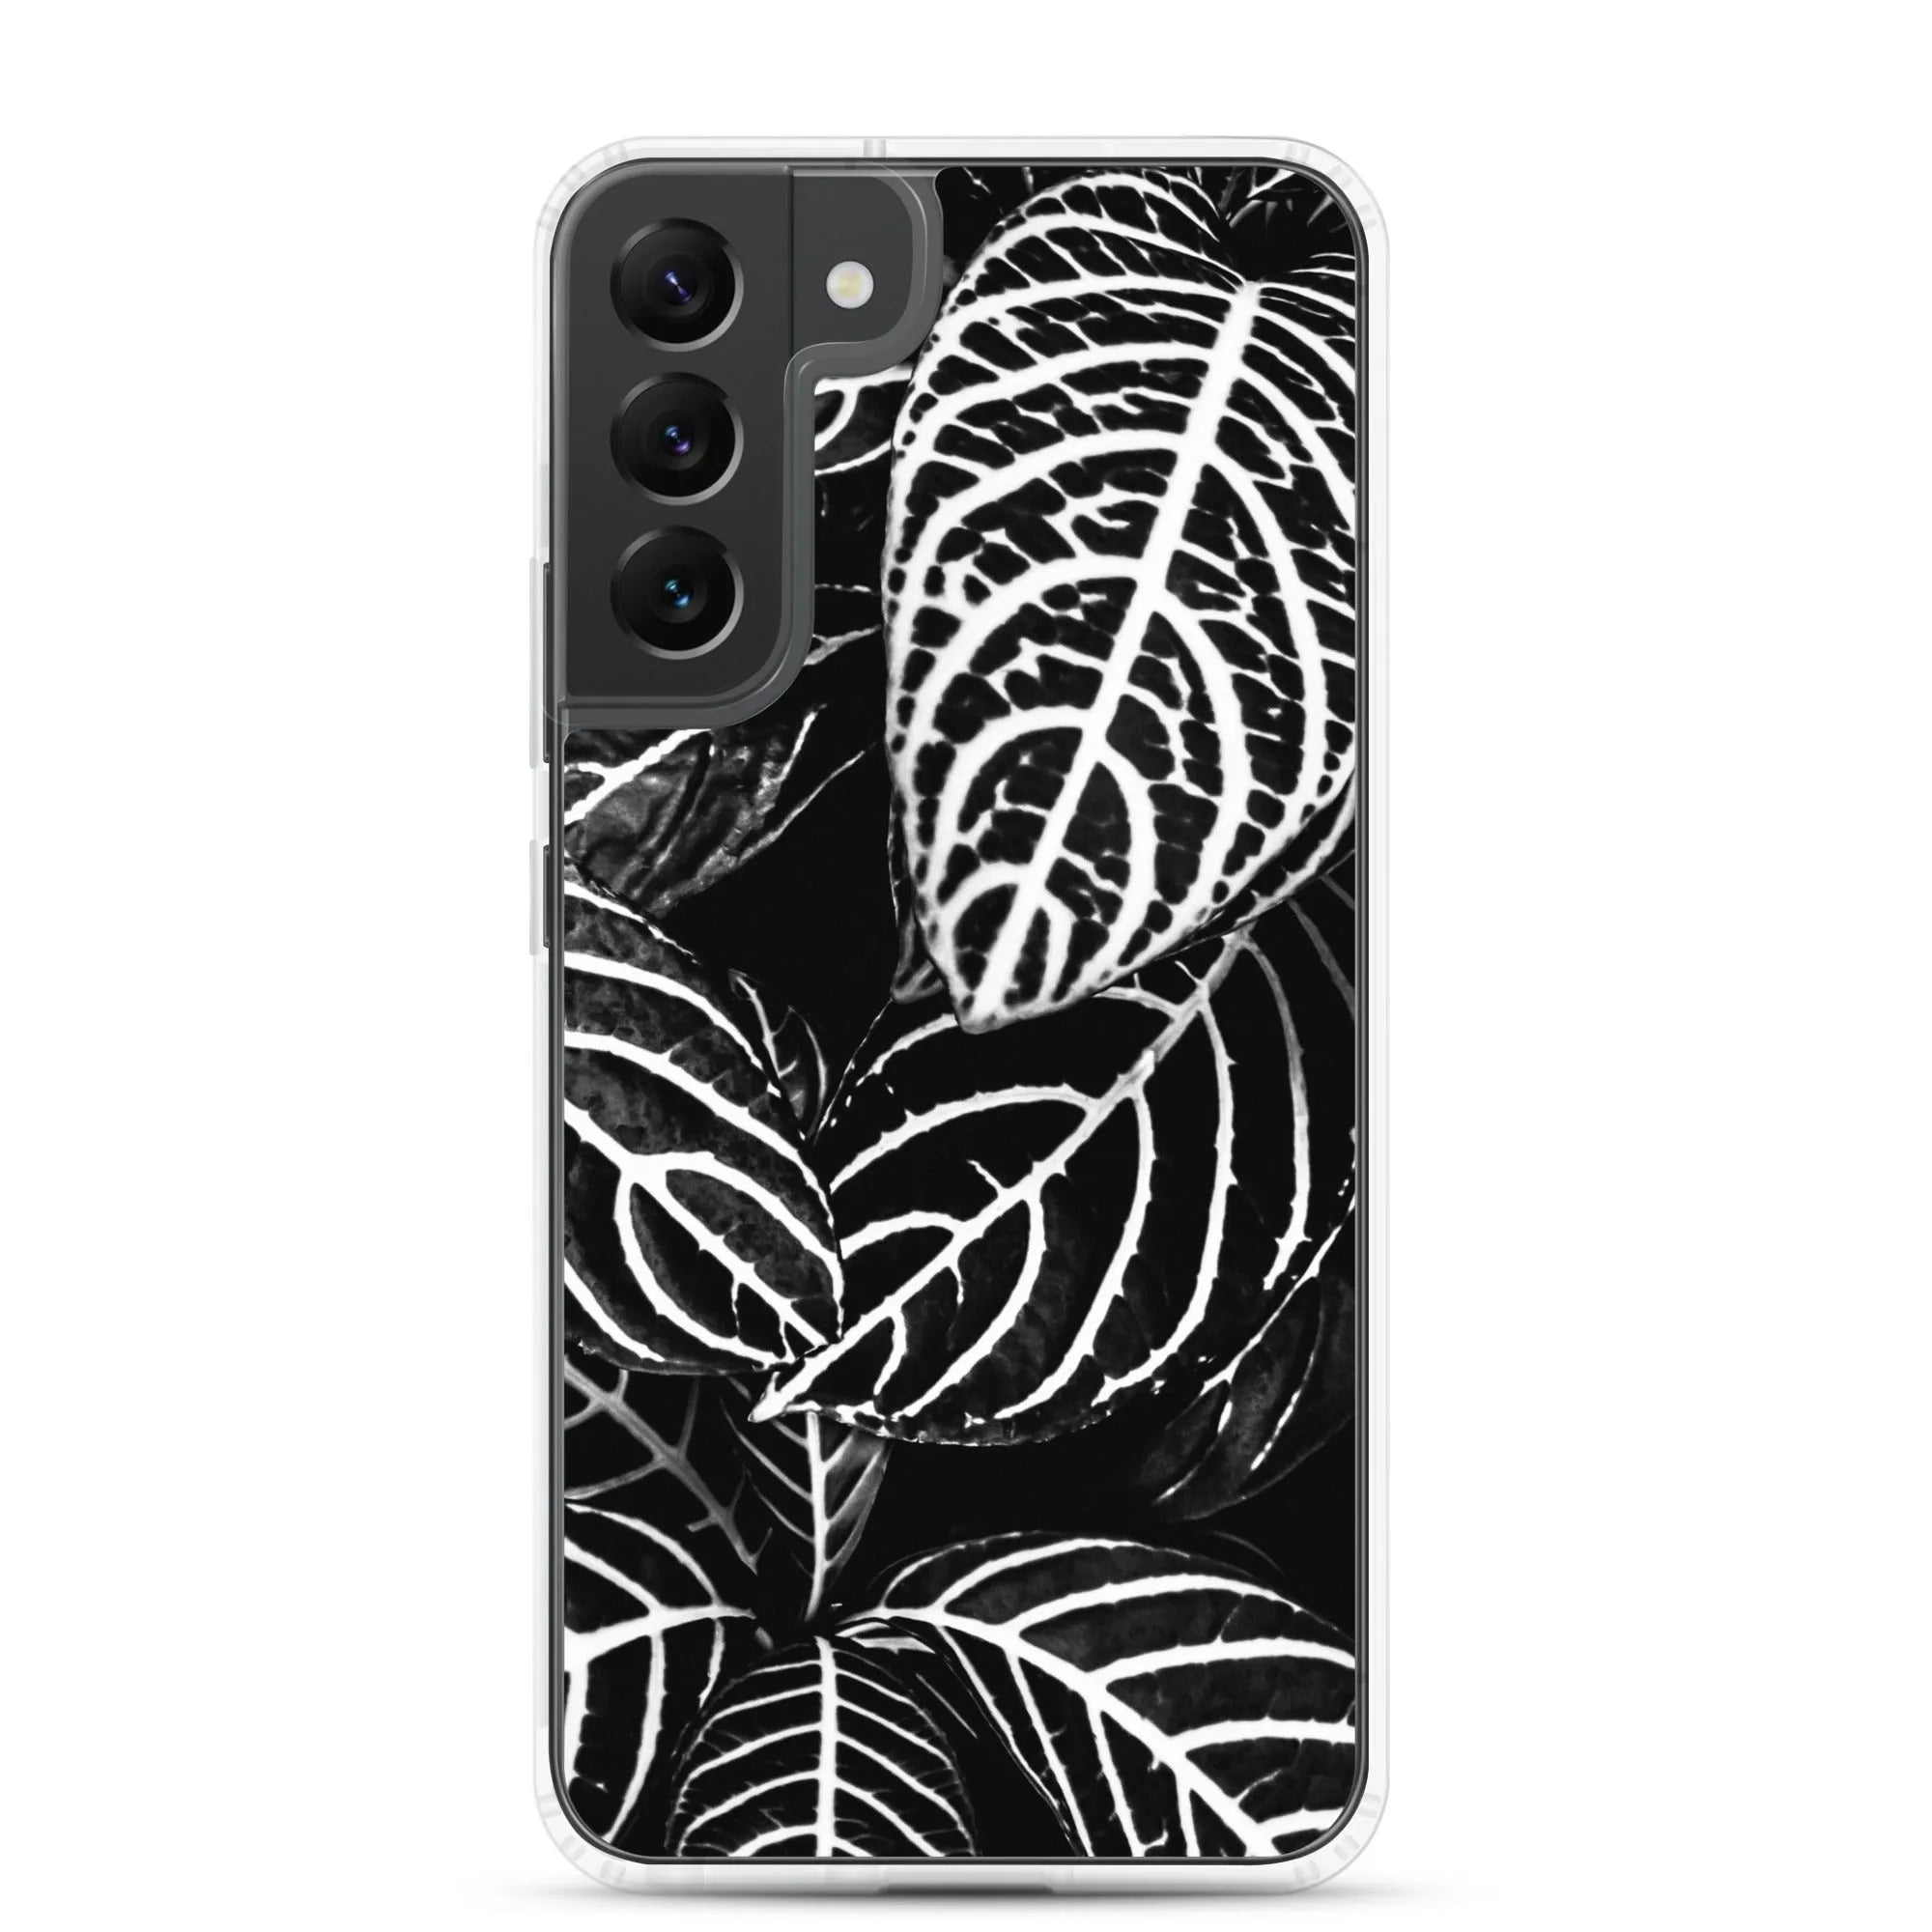 Just The Headlines Samsung Galaxy Case - Black And White - Samsung Galaxy S22 Plus - Mobile Phone Cases - Aesthetic Art